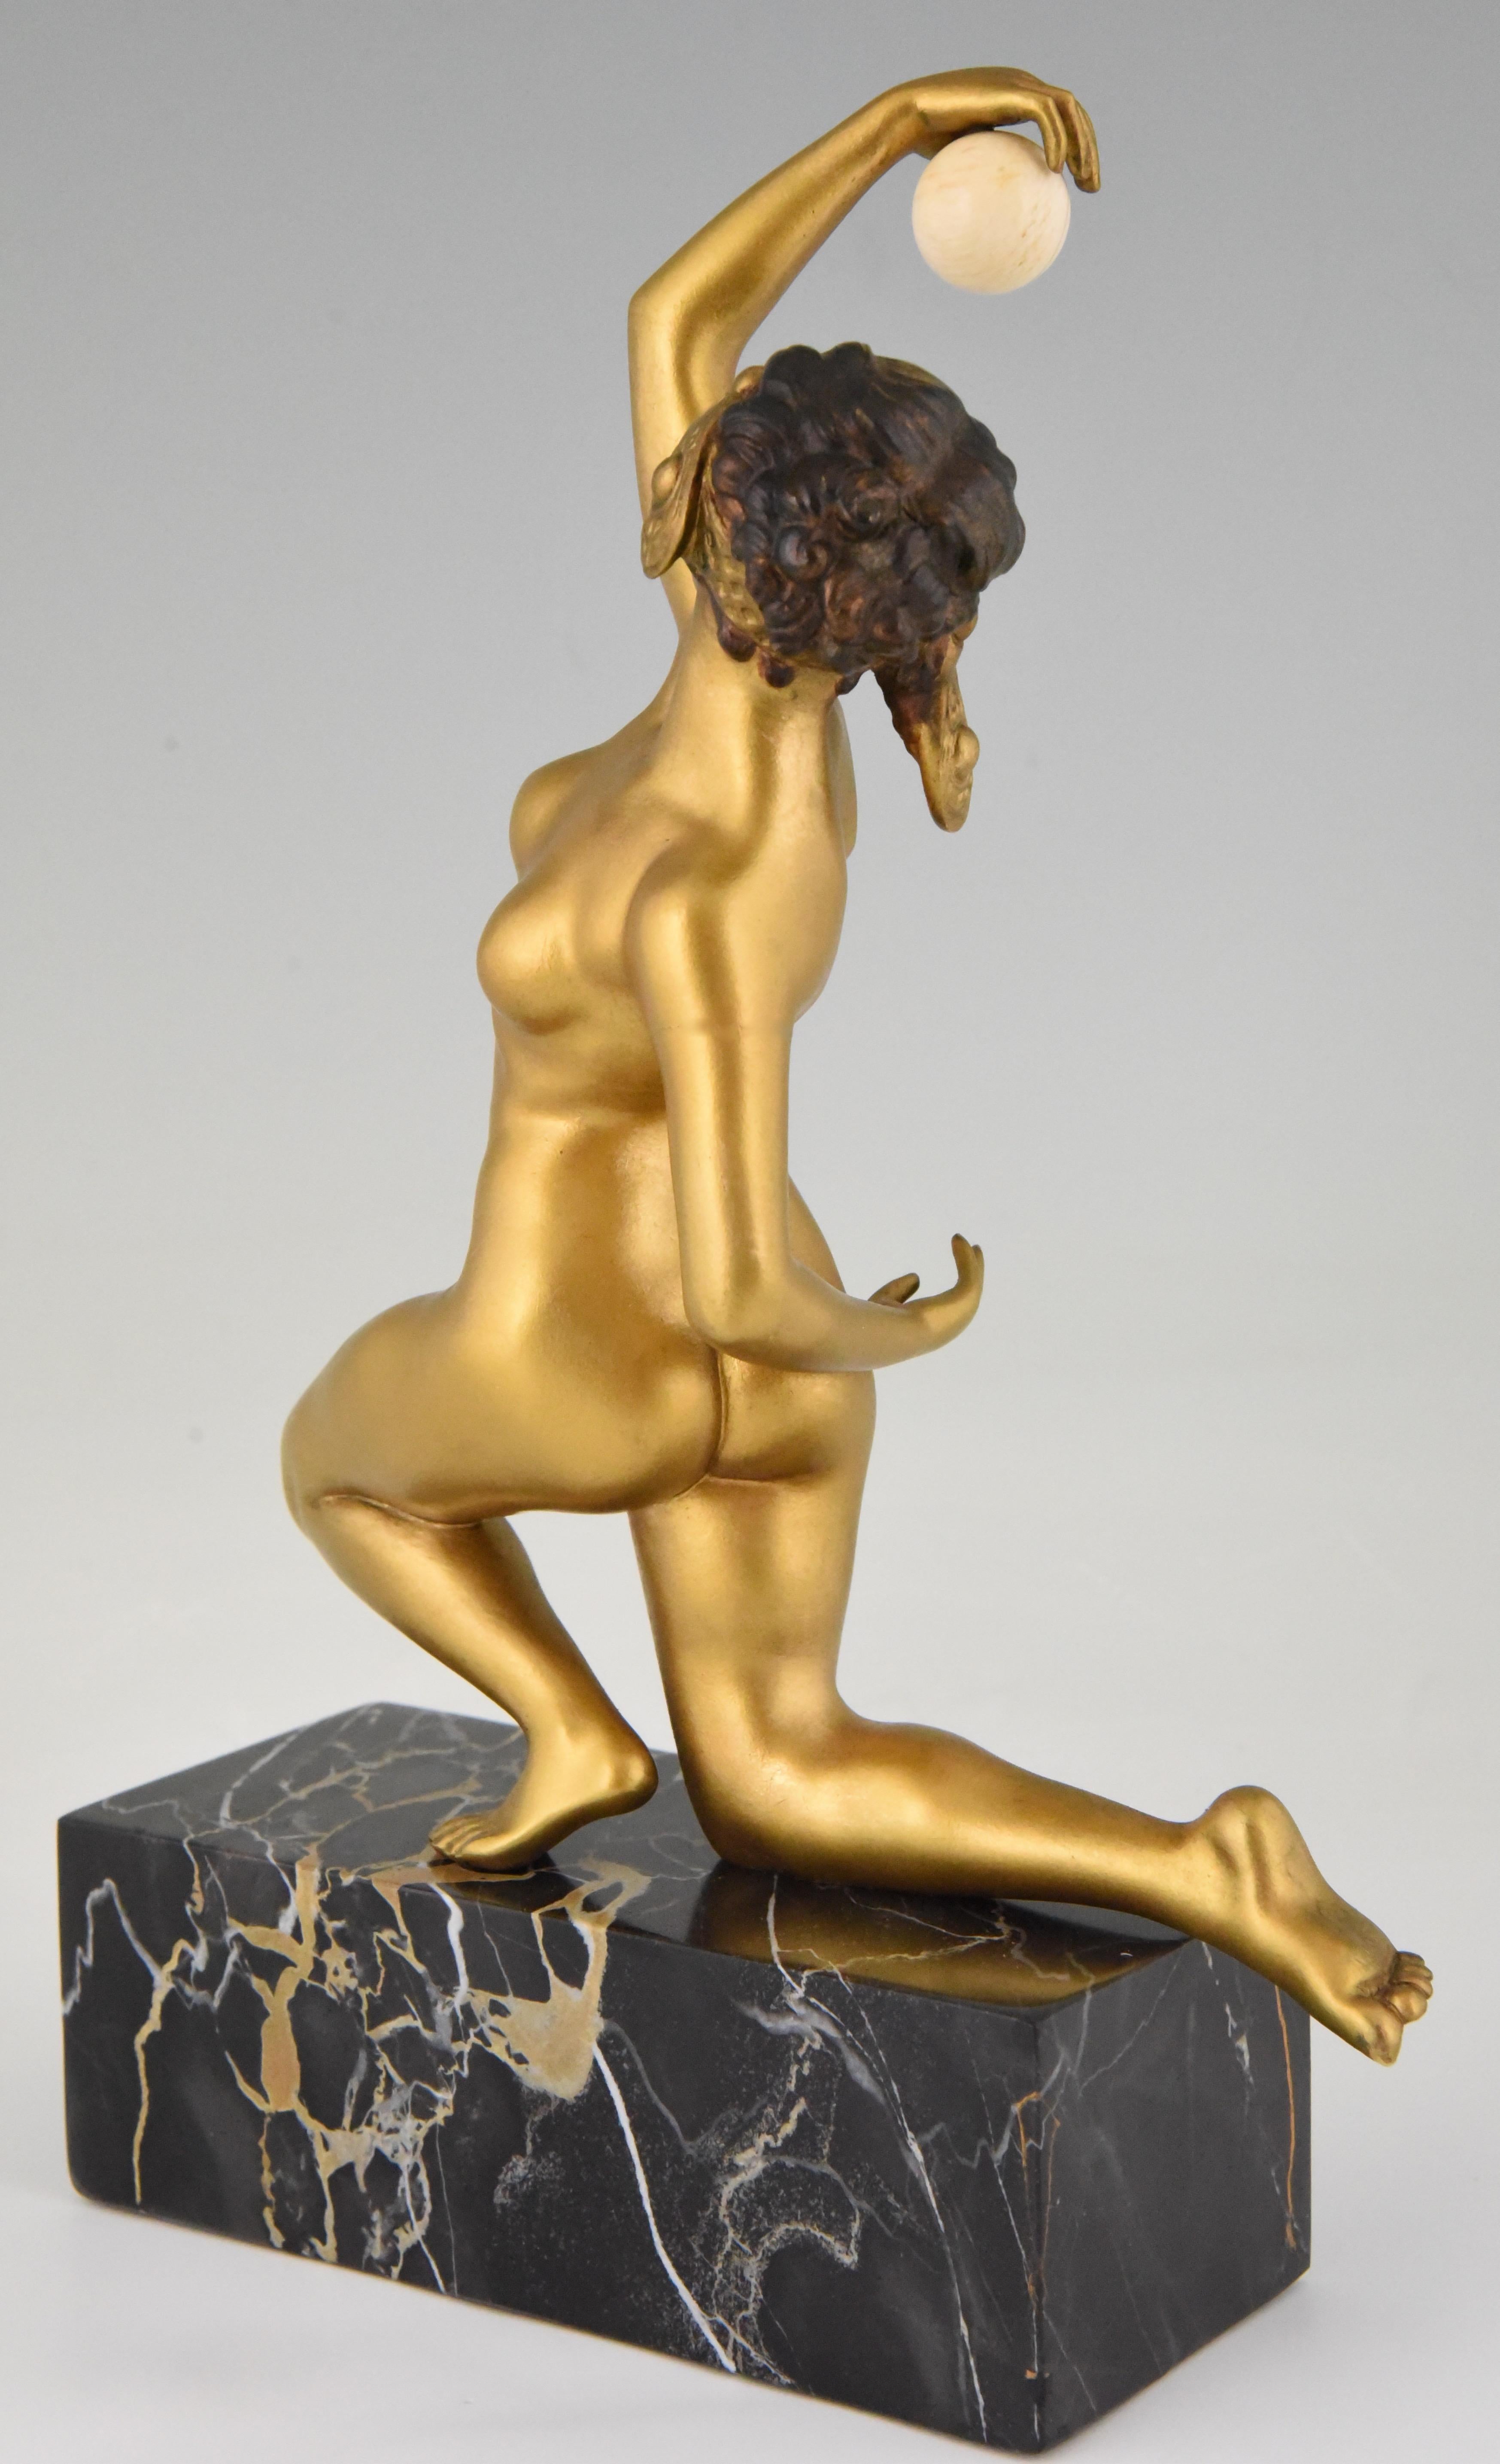 20th Century Art Deco Bronze Sculpture Nude with Ball Affortunato Gory 1920 France